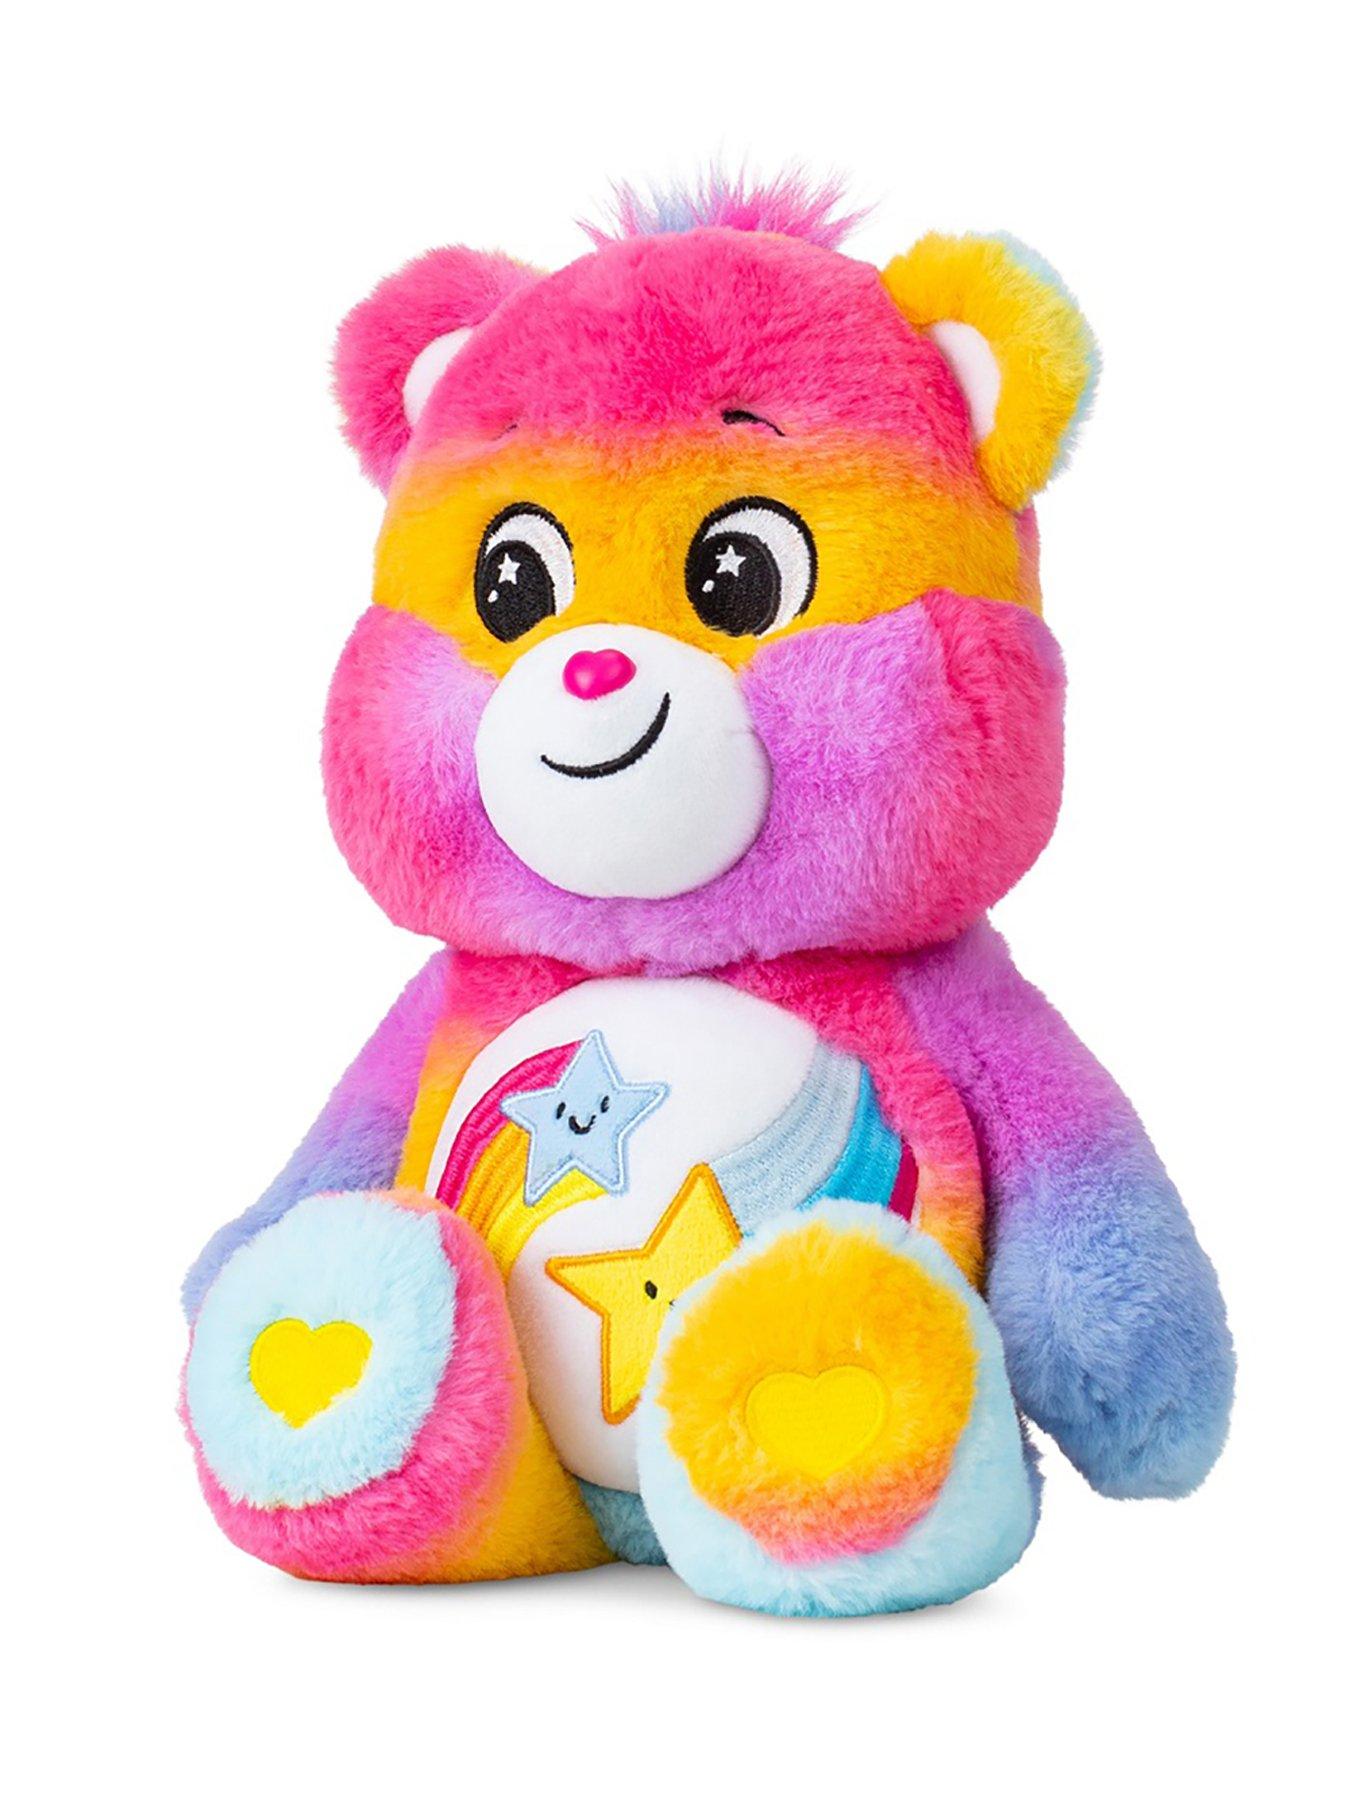 Care Bears 14 Medium Plush - Dream Bright Bear - Light Blue Plushie for  Ages 4+ – Stuffed Animal, Soft and Cuddly – Good for Girls and Boys